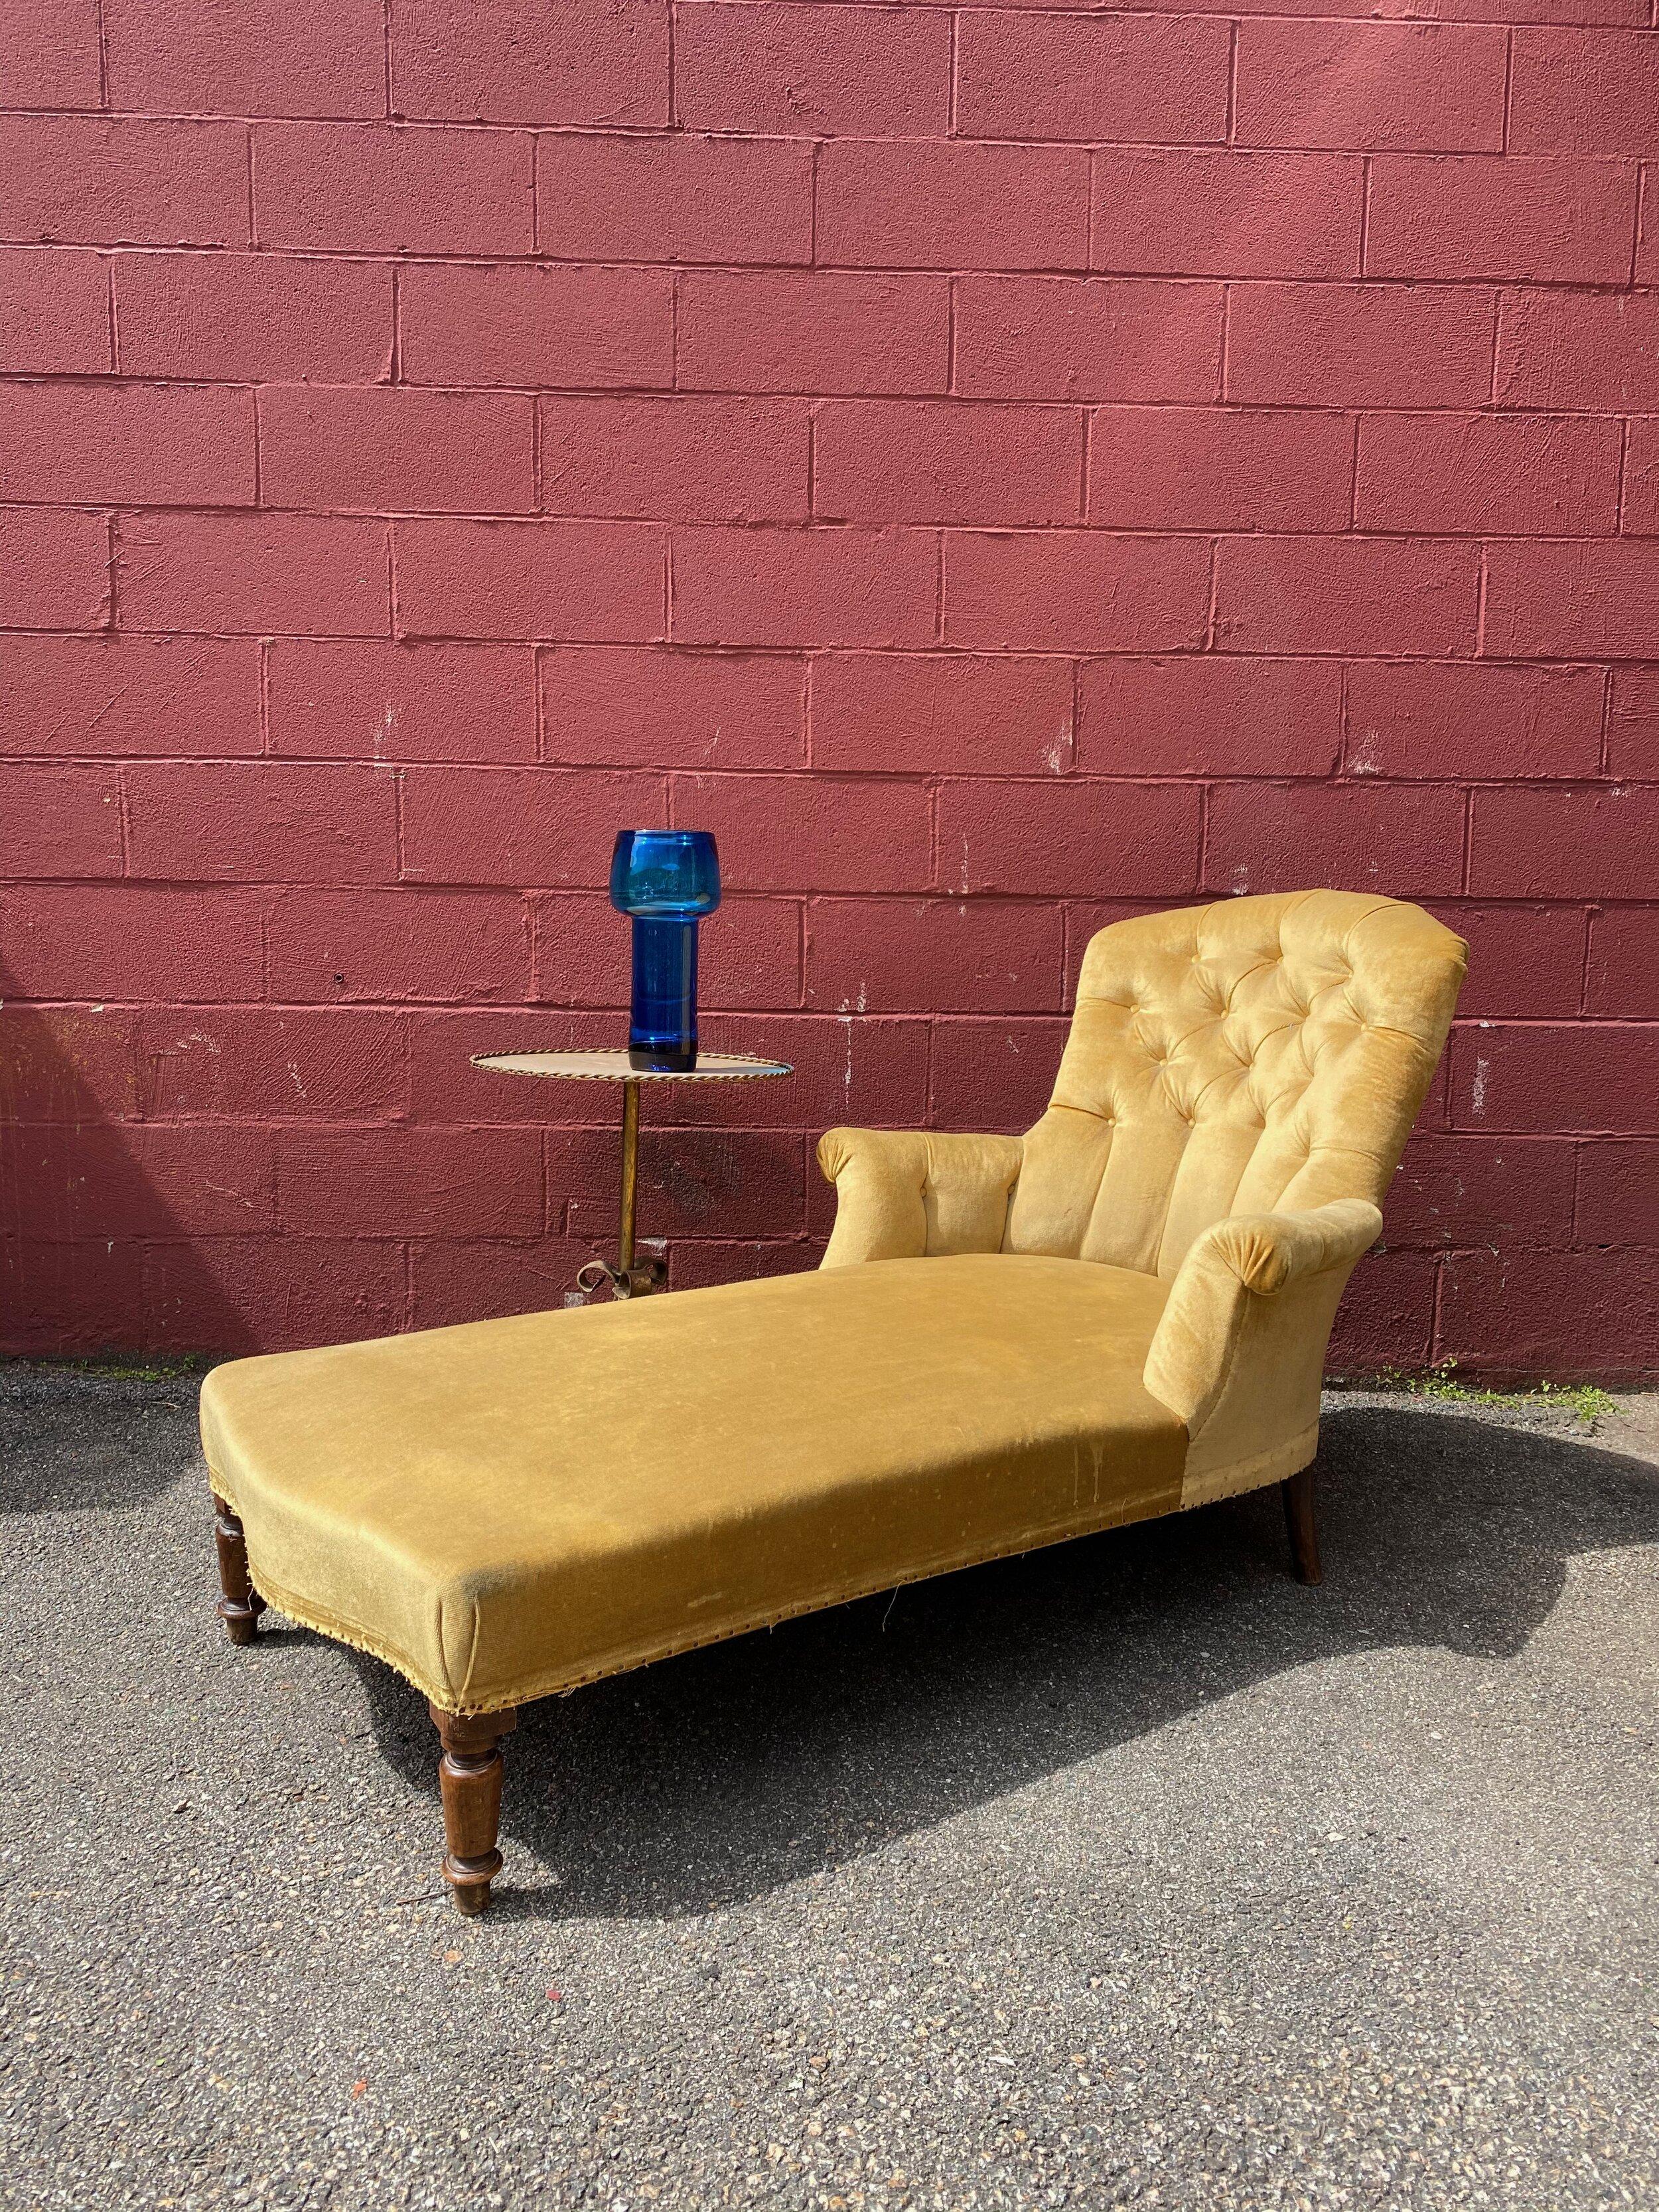 French 19th century Napoleon III chaise longue upholstered and tufted in gold velvet. The chaise is very comfortable. Sold as is.

Ref #  SN0615-08

Dimensions: 64” x 33” x 35” H ( 13” seat height  ) 